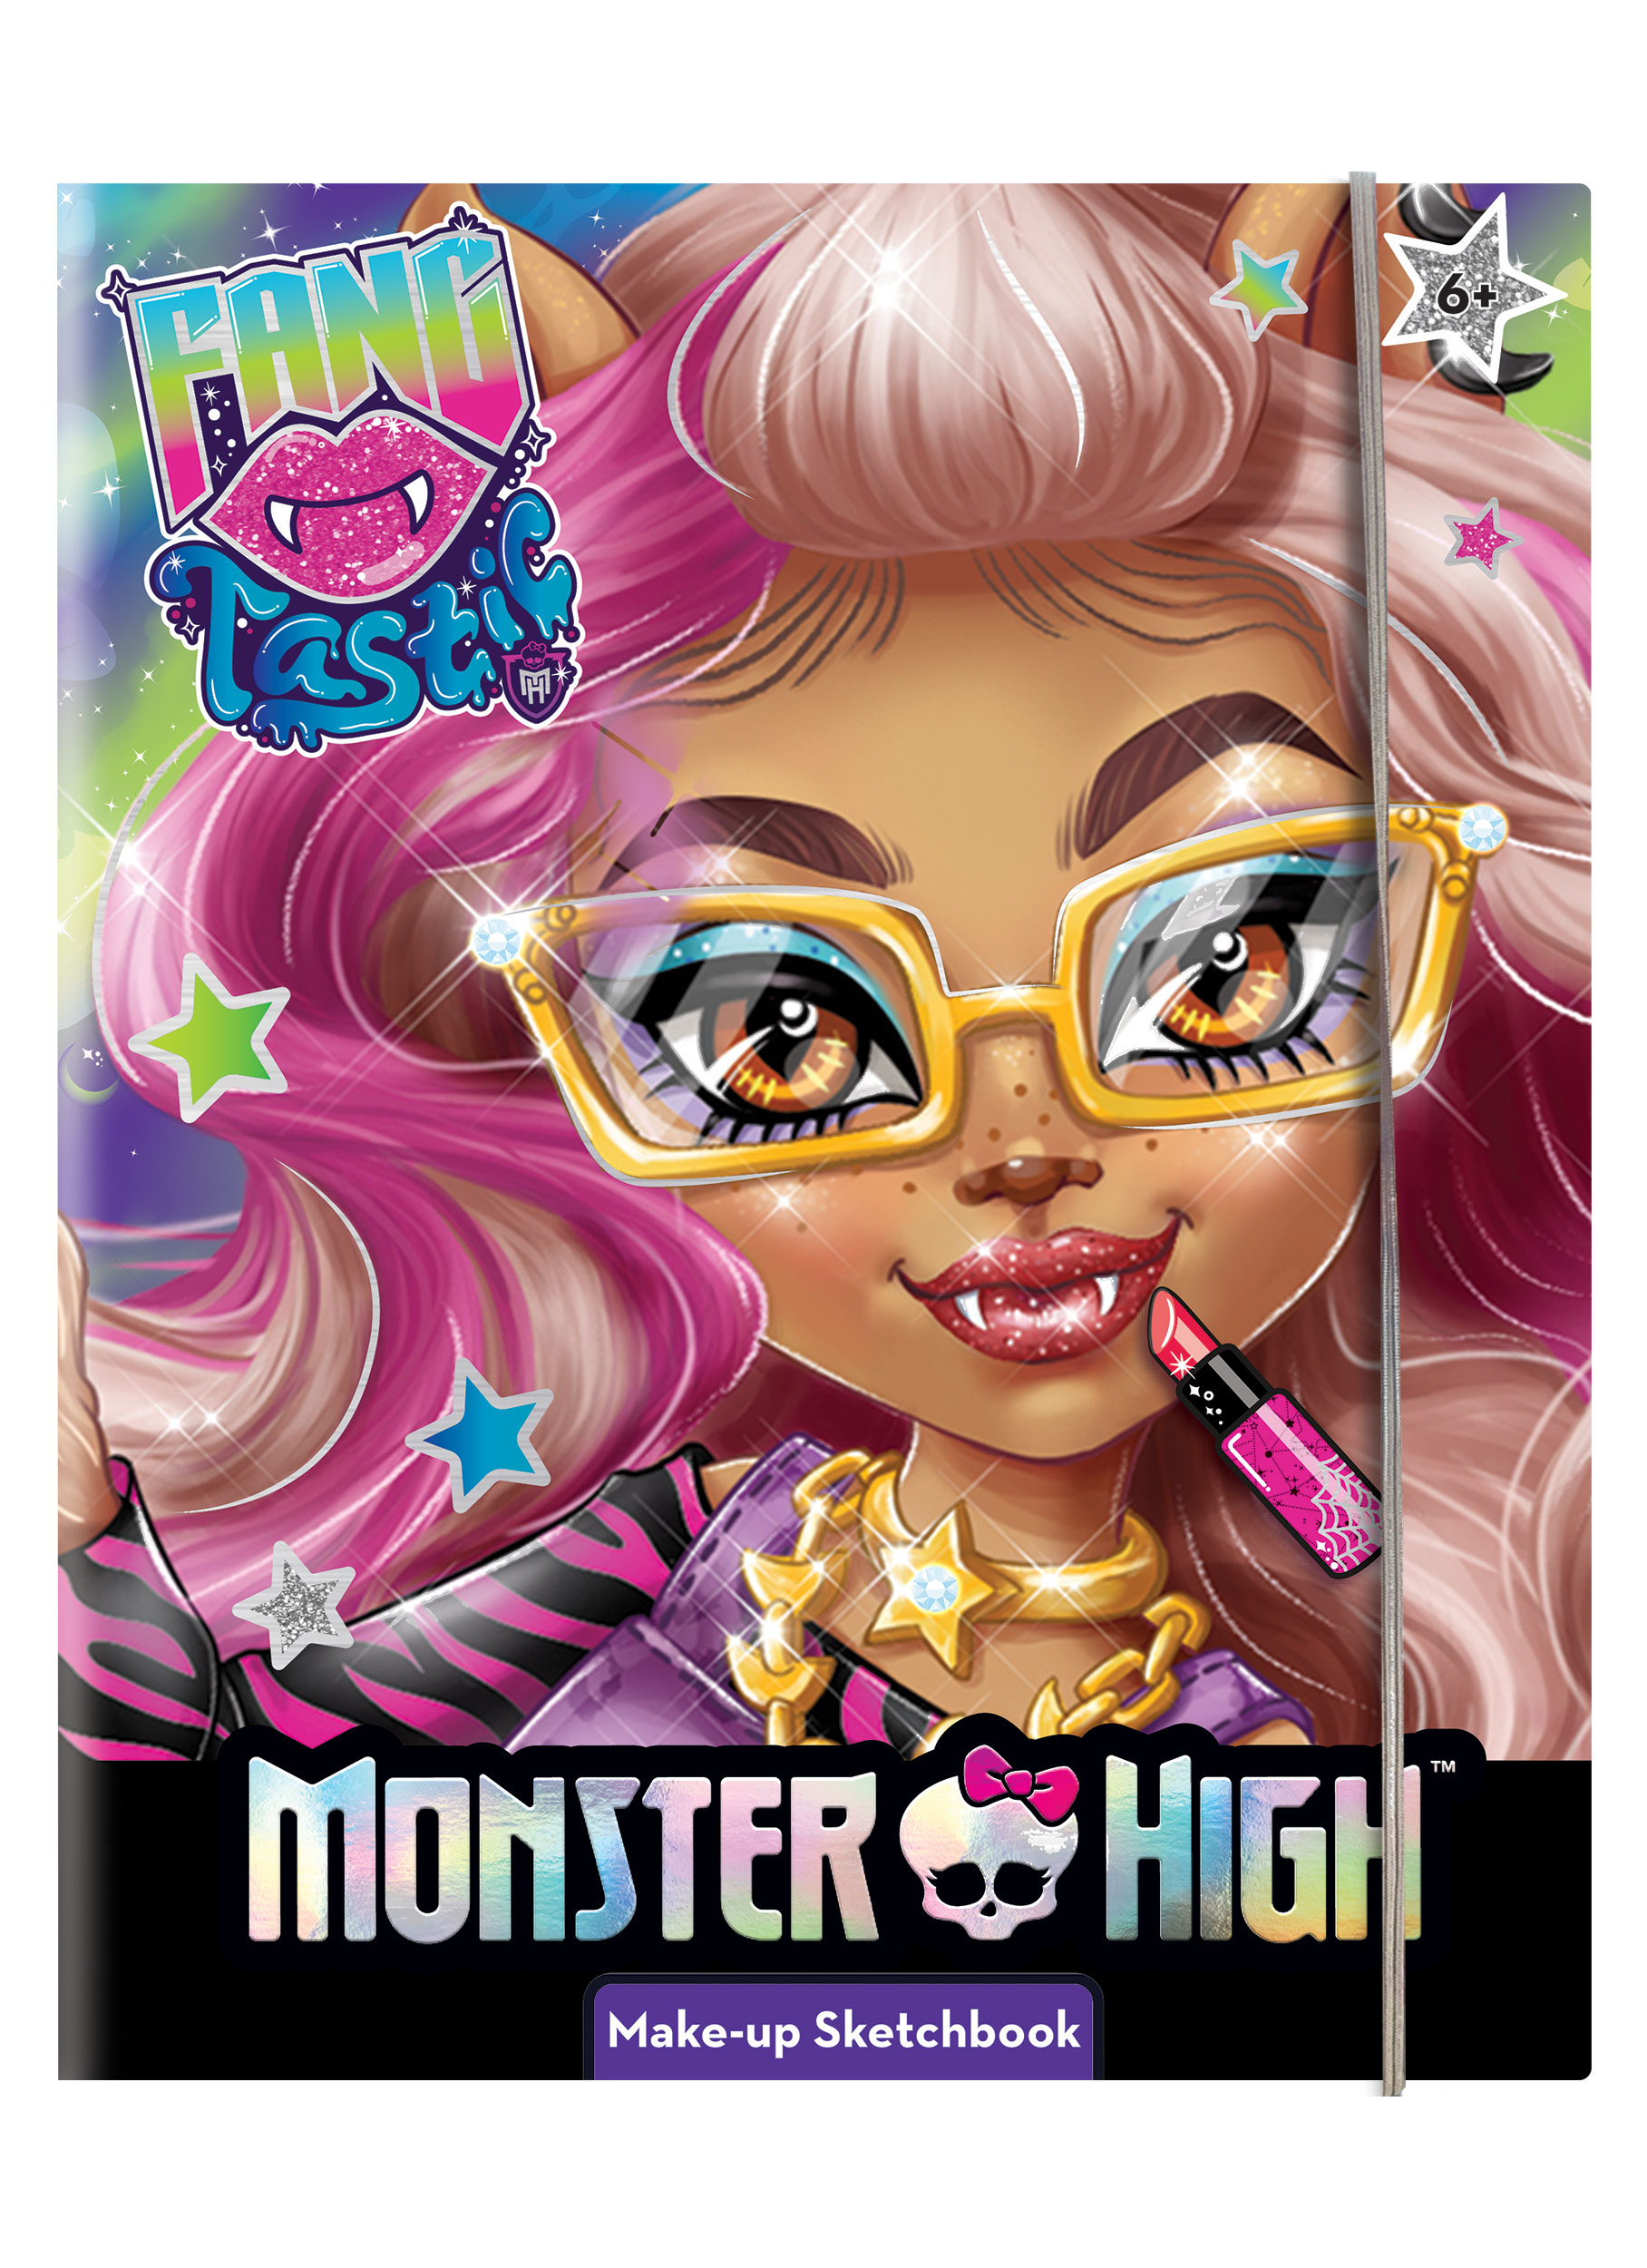 Photo 1 of the game MONSTER HIGH SKETCHBOOK FANGTASTIC MAKE-UP IN DISPLAY 6